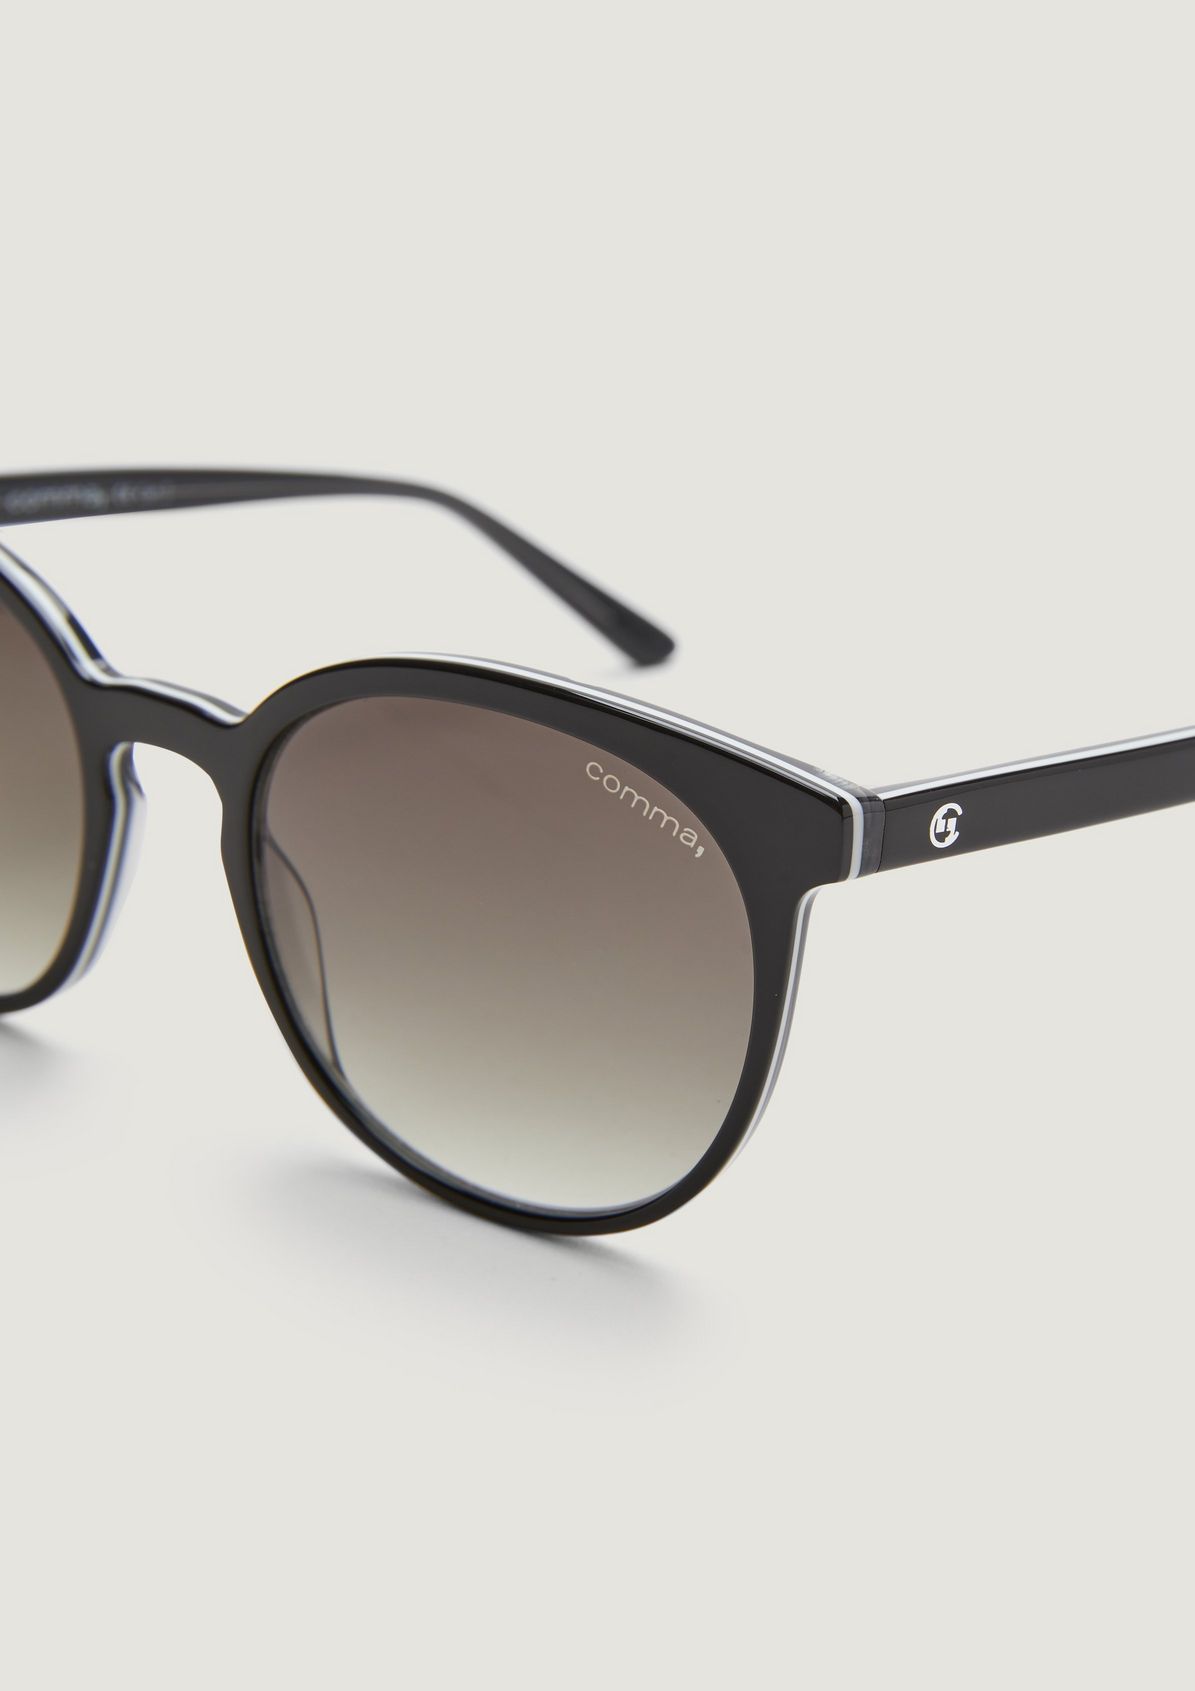 Sunglasses from comma